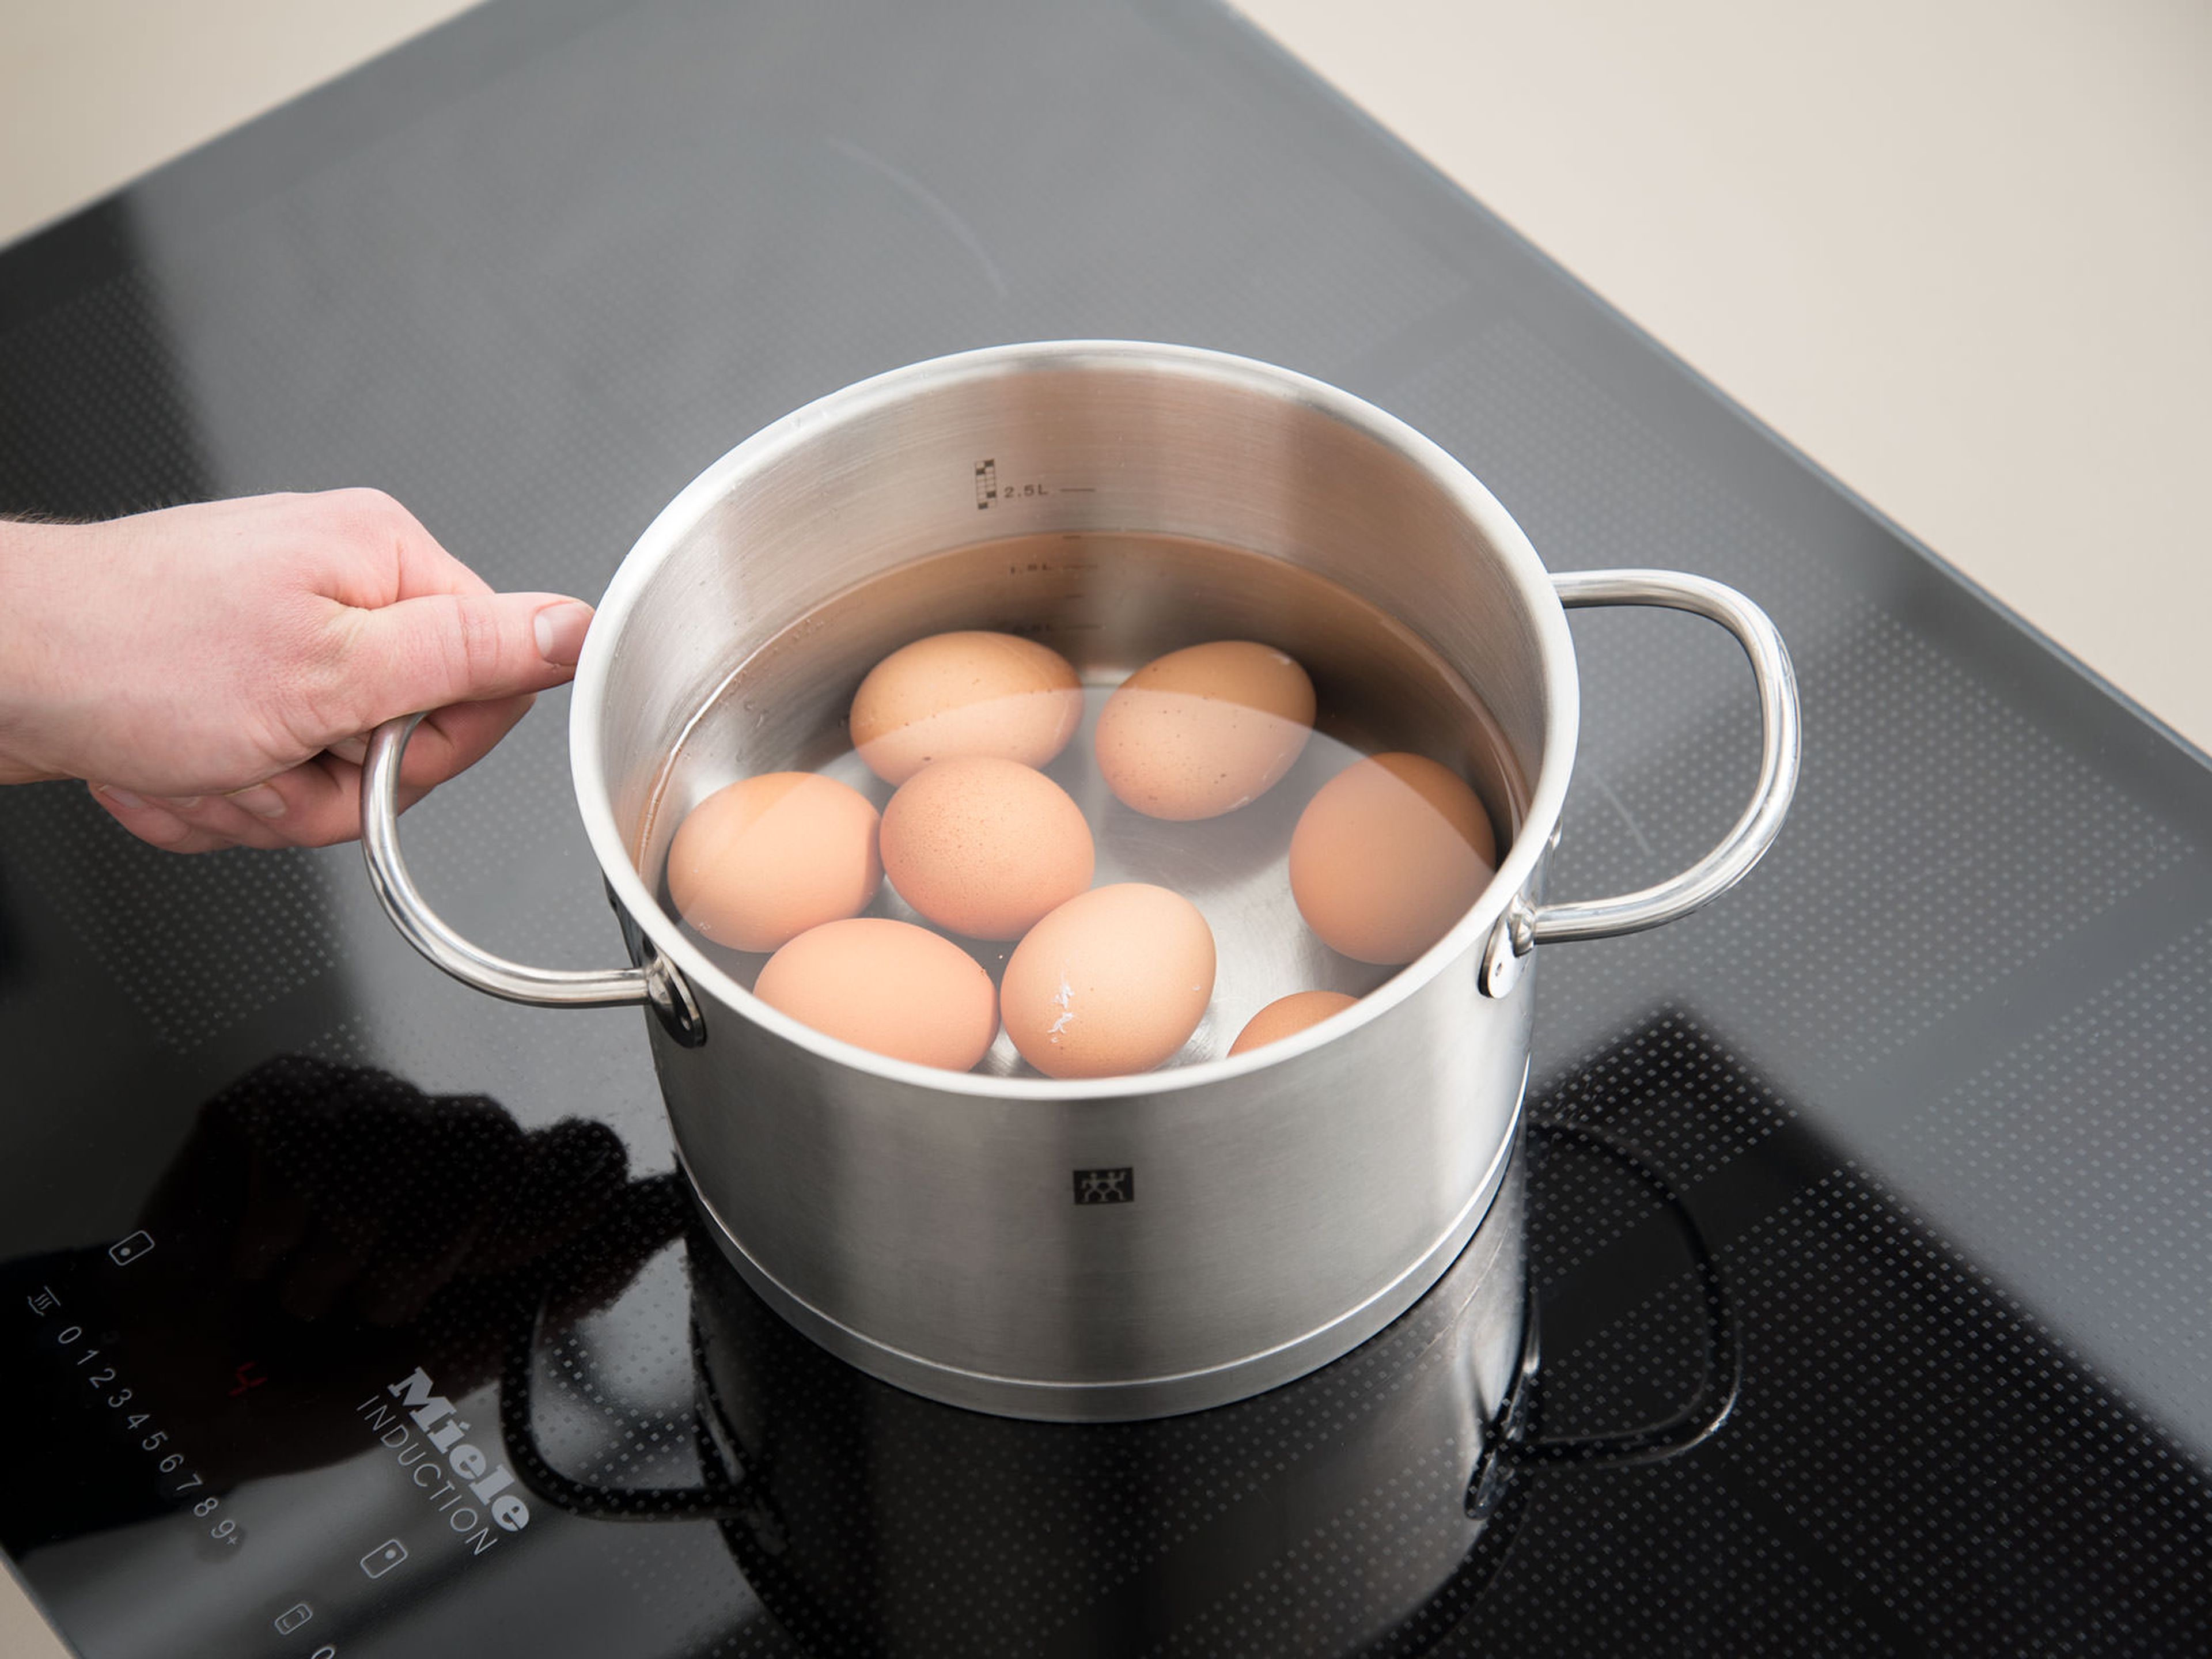 Add eggs to a pot with water. Bring to a boil and cook for approx. 8 min. or until hard-boiled.